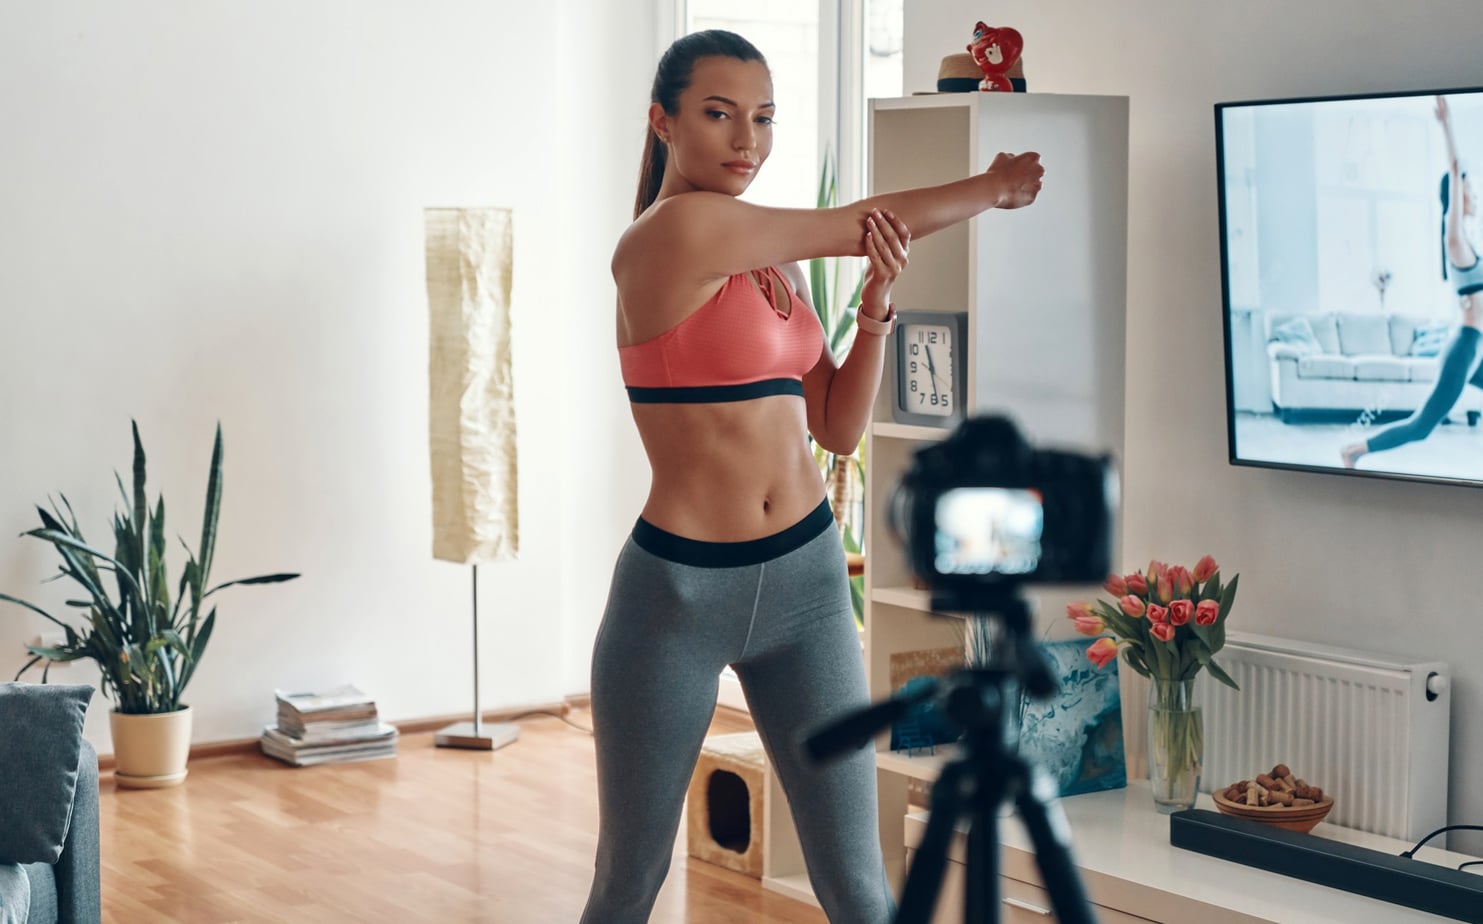 Fitness Instagram Influencers See Surge in DTC Workout Service Sales